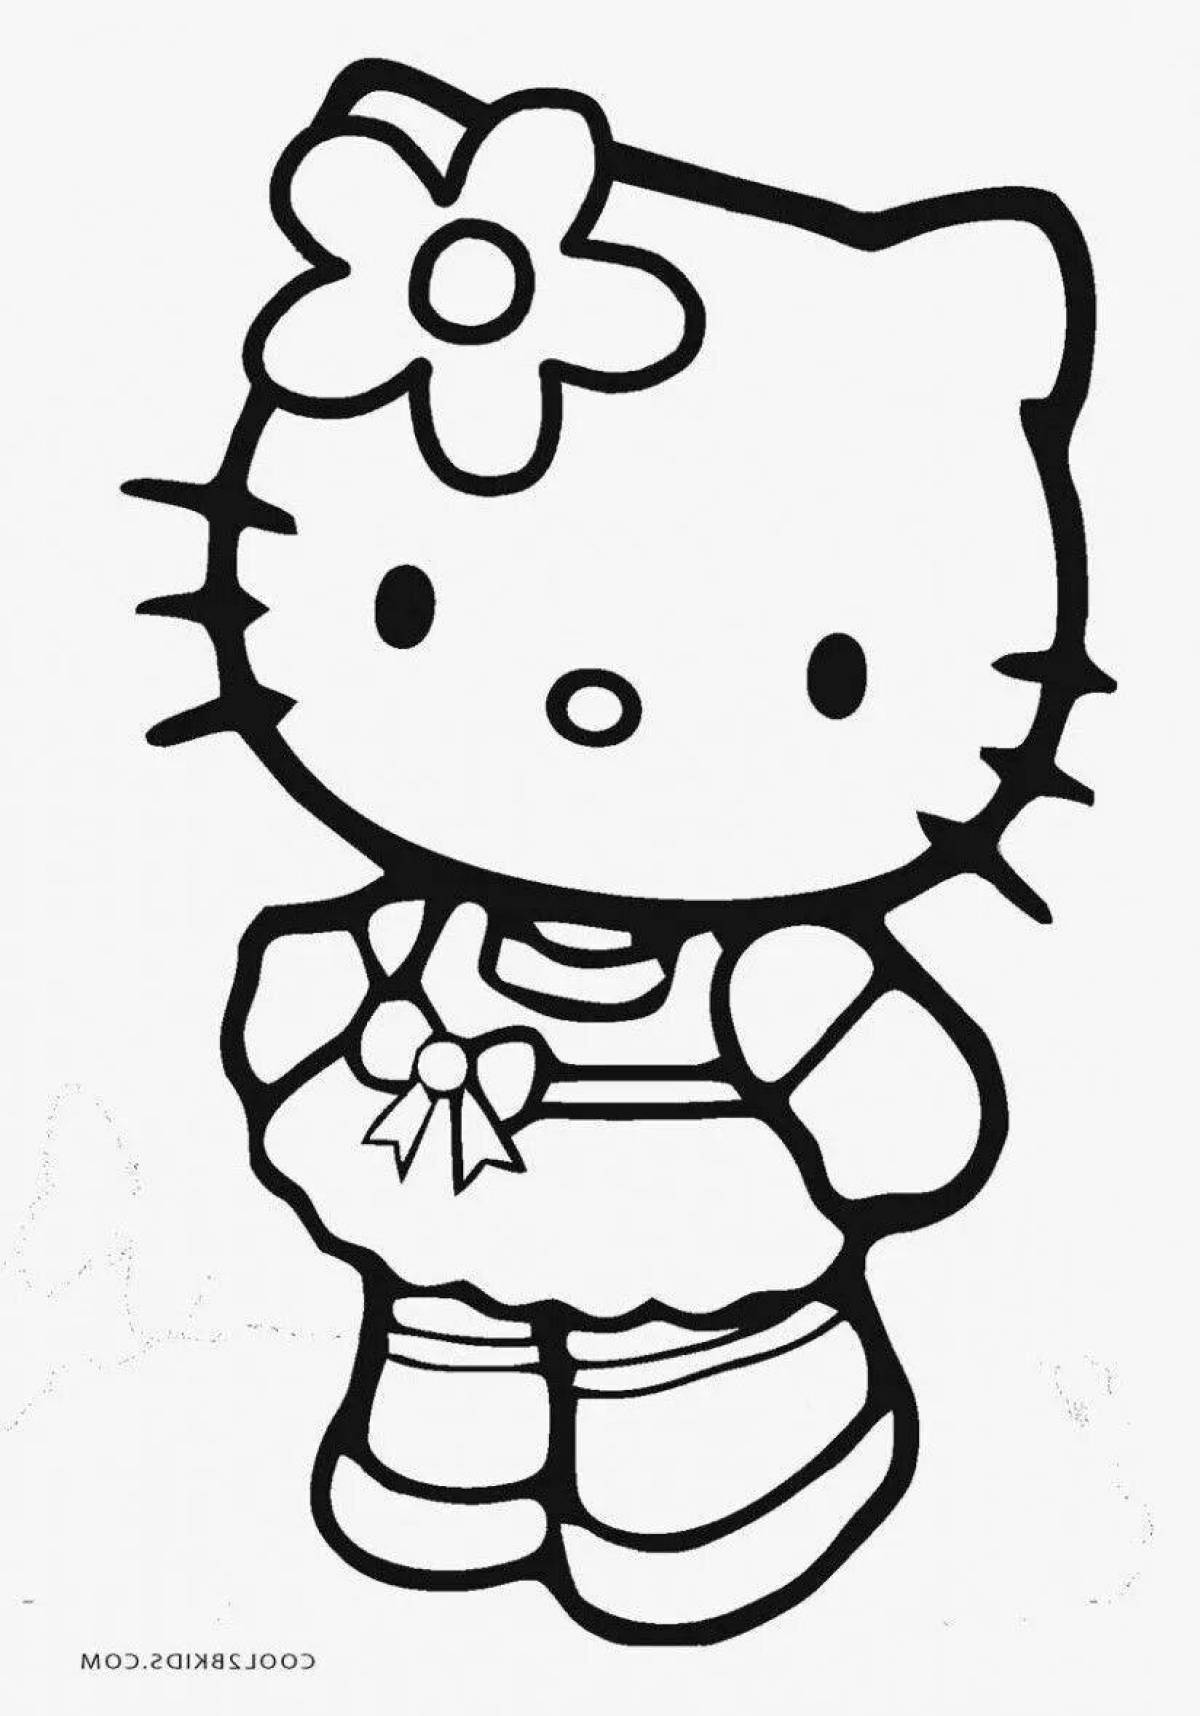 Milady from hello kitty #5